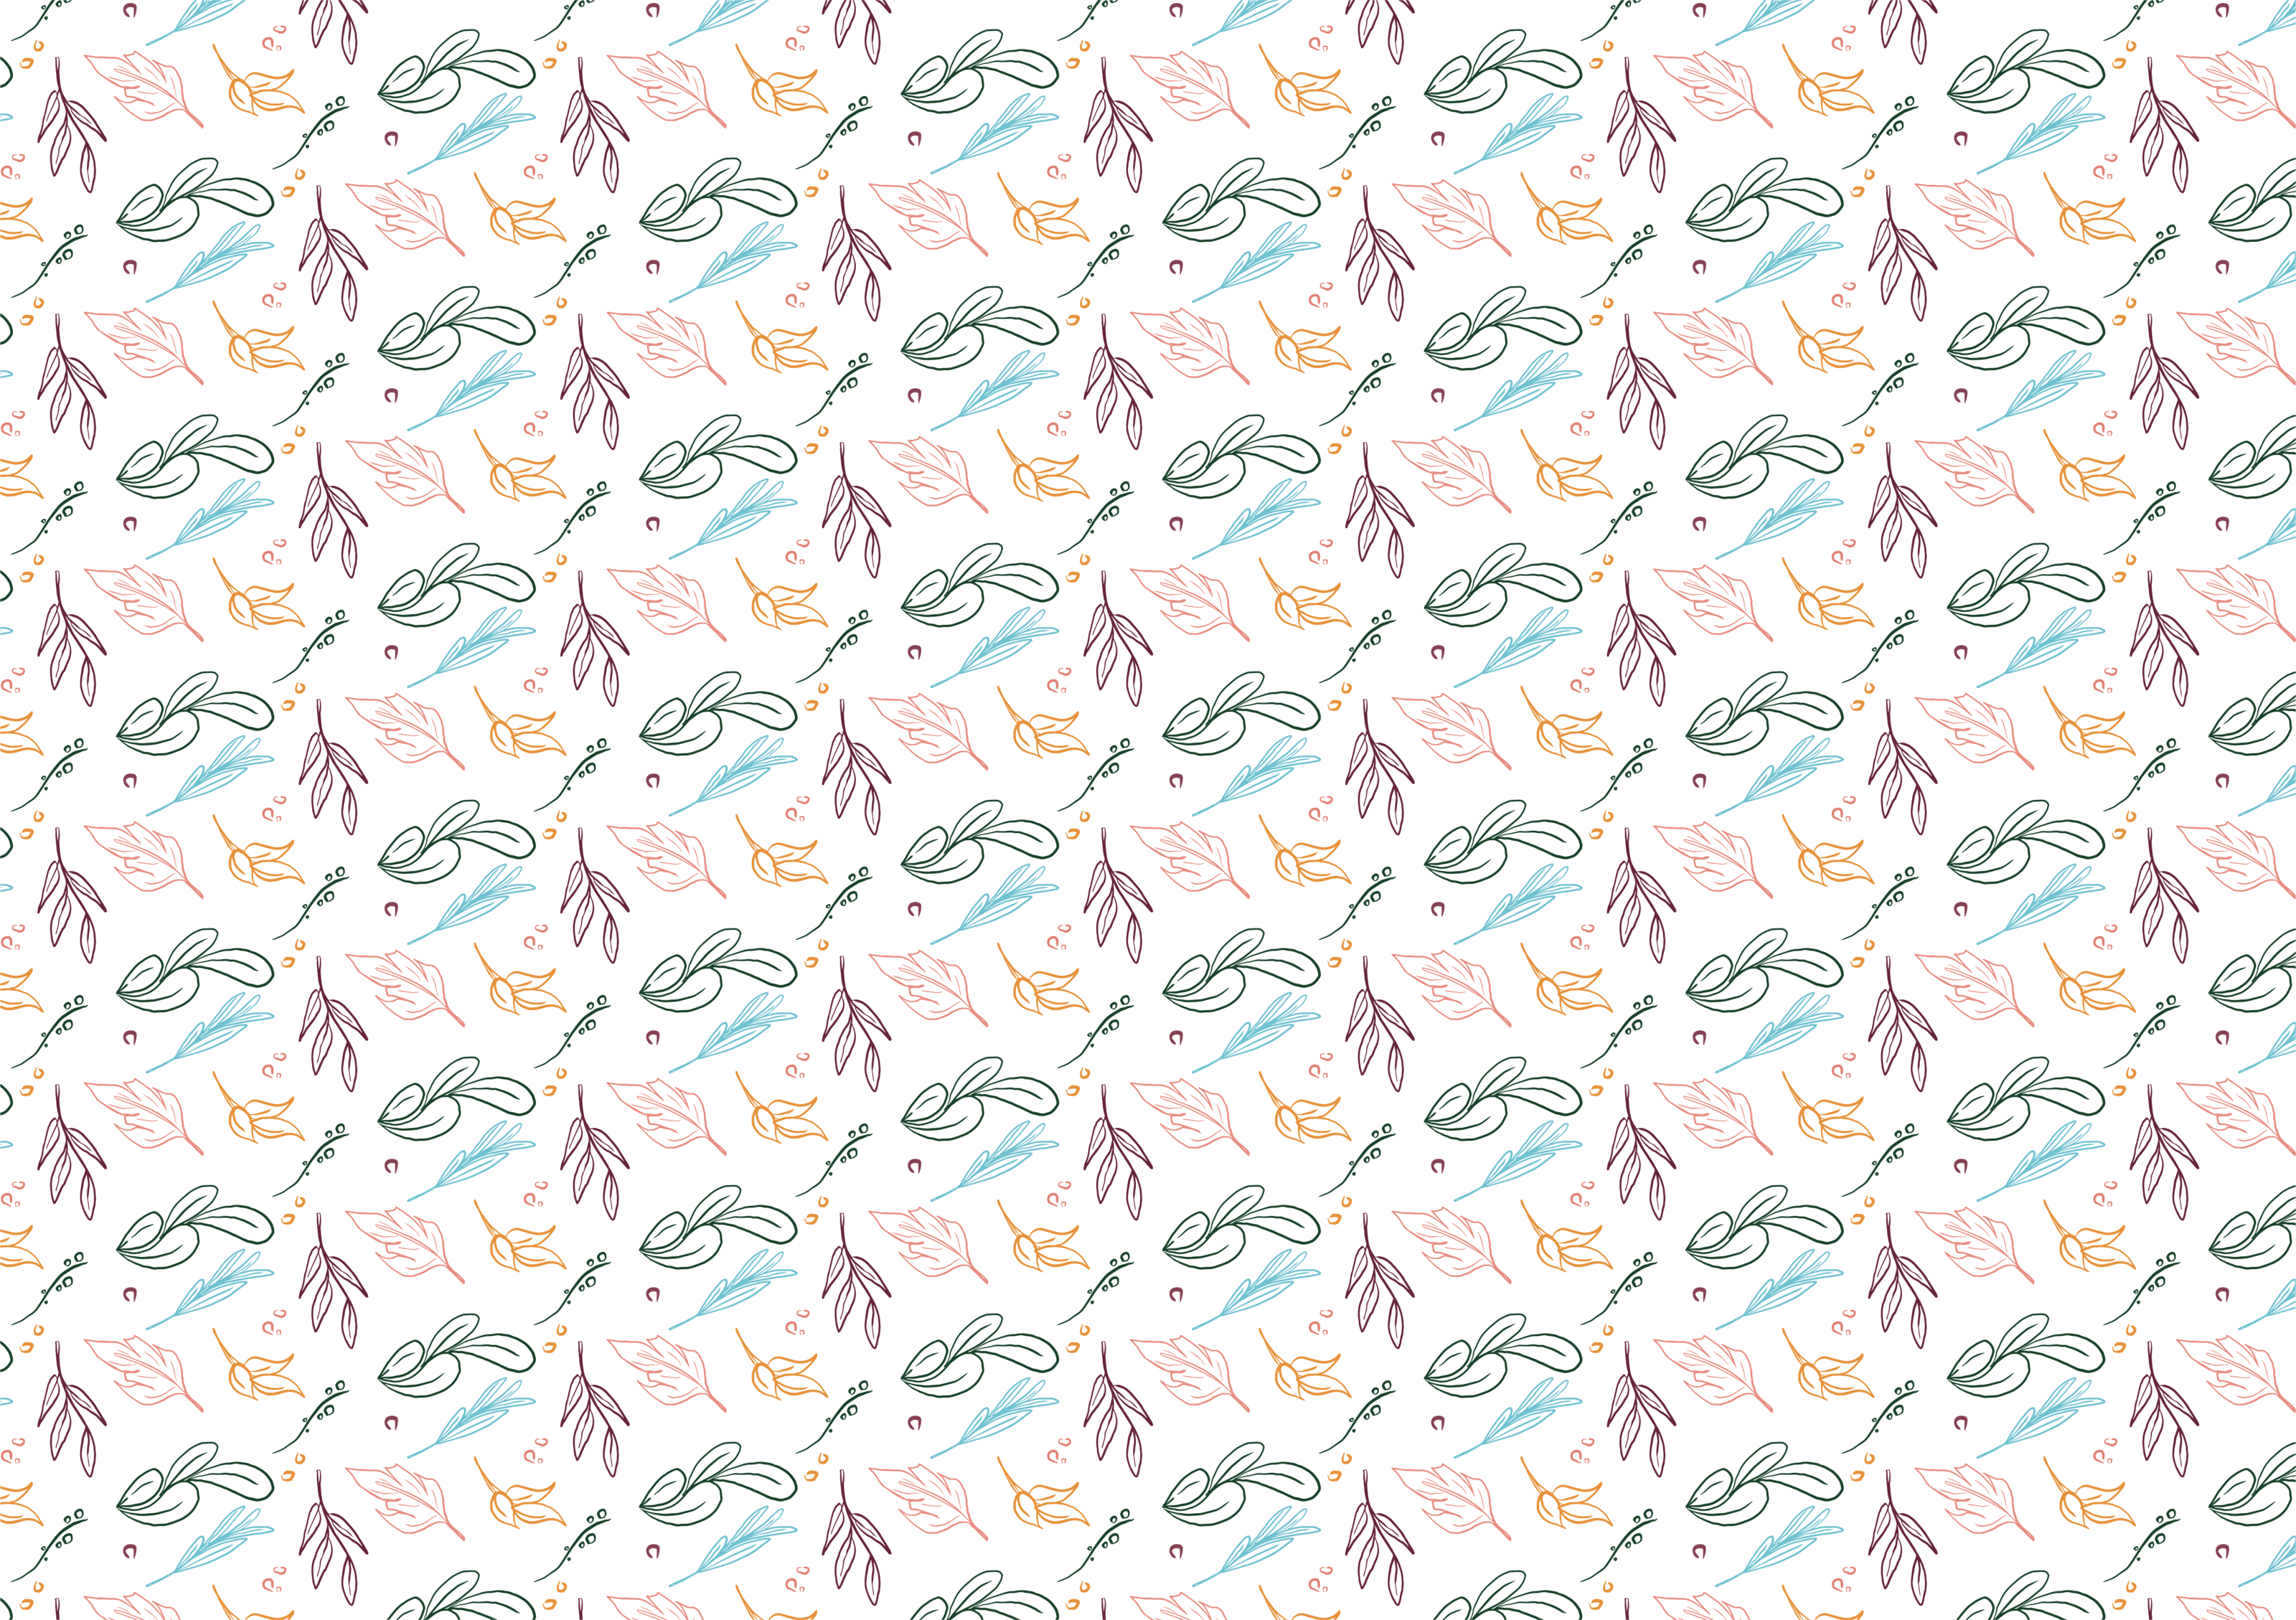 leaves and flowers pattern